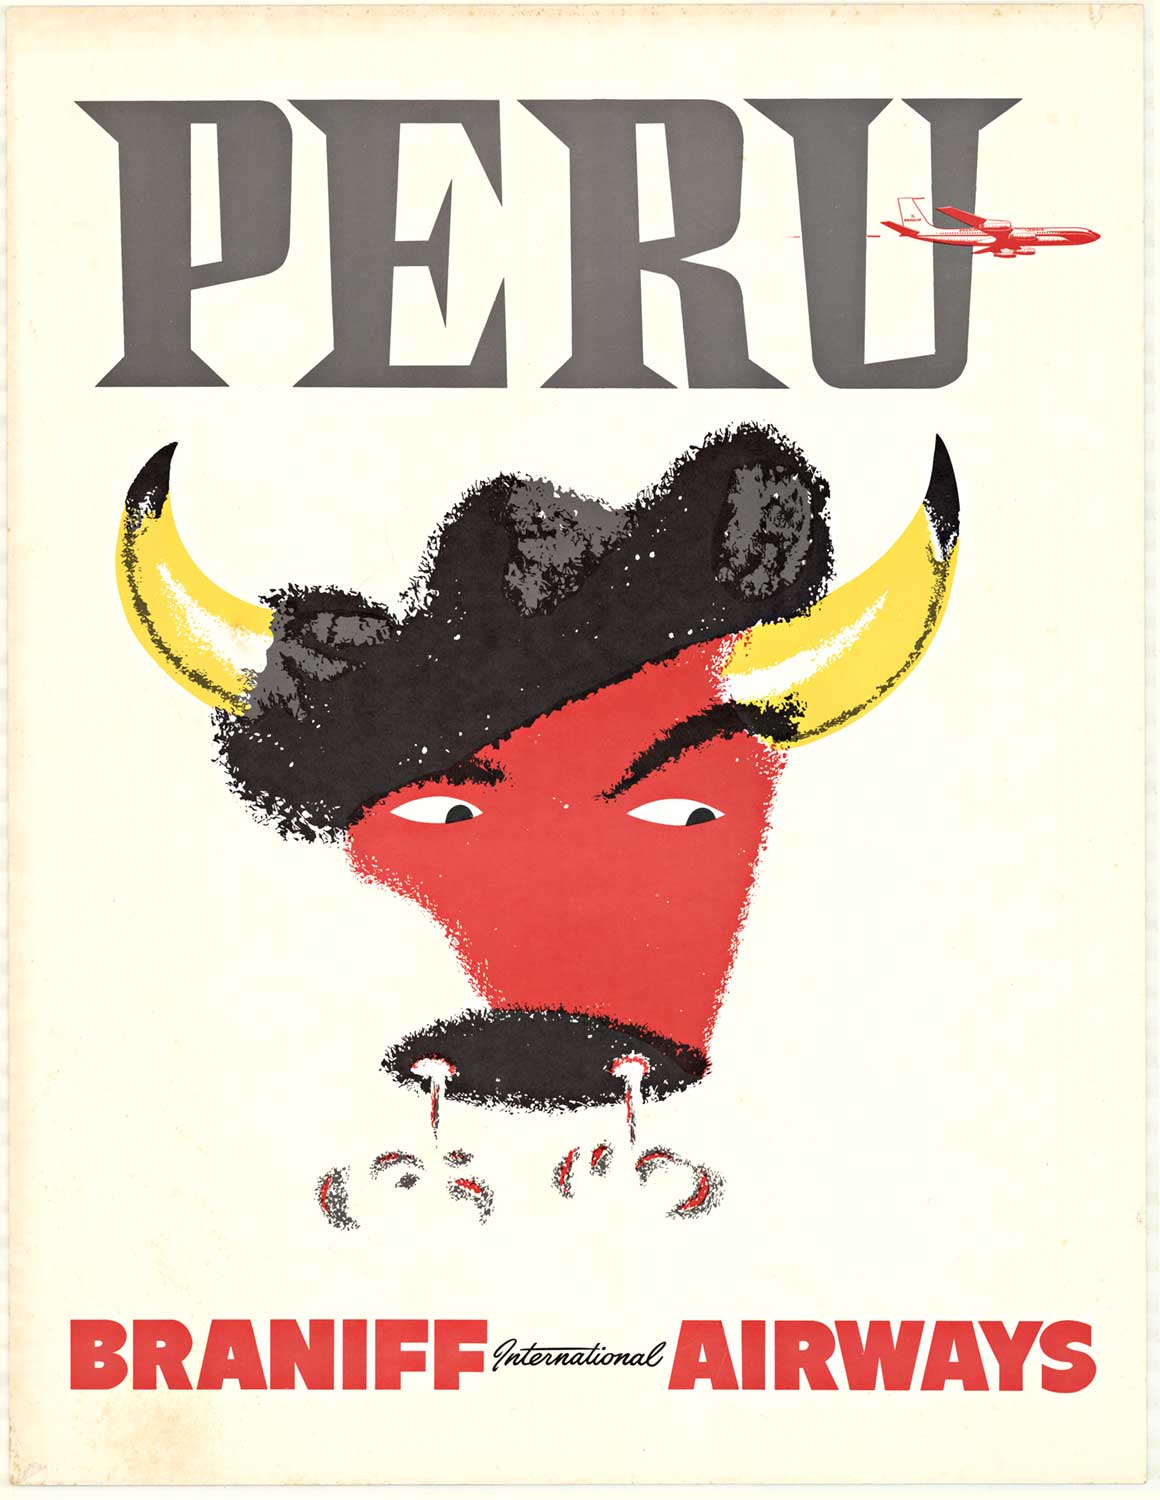 Original travel poster: Braniff International Airways, Peru Bull. Size 20" x 26" B+ condition. <br> <br>See how the bull snorts! And why shouldn't he? He's got the matador's hat so he must've won the fight. This poster was printed on a heavy stock pap